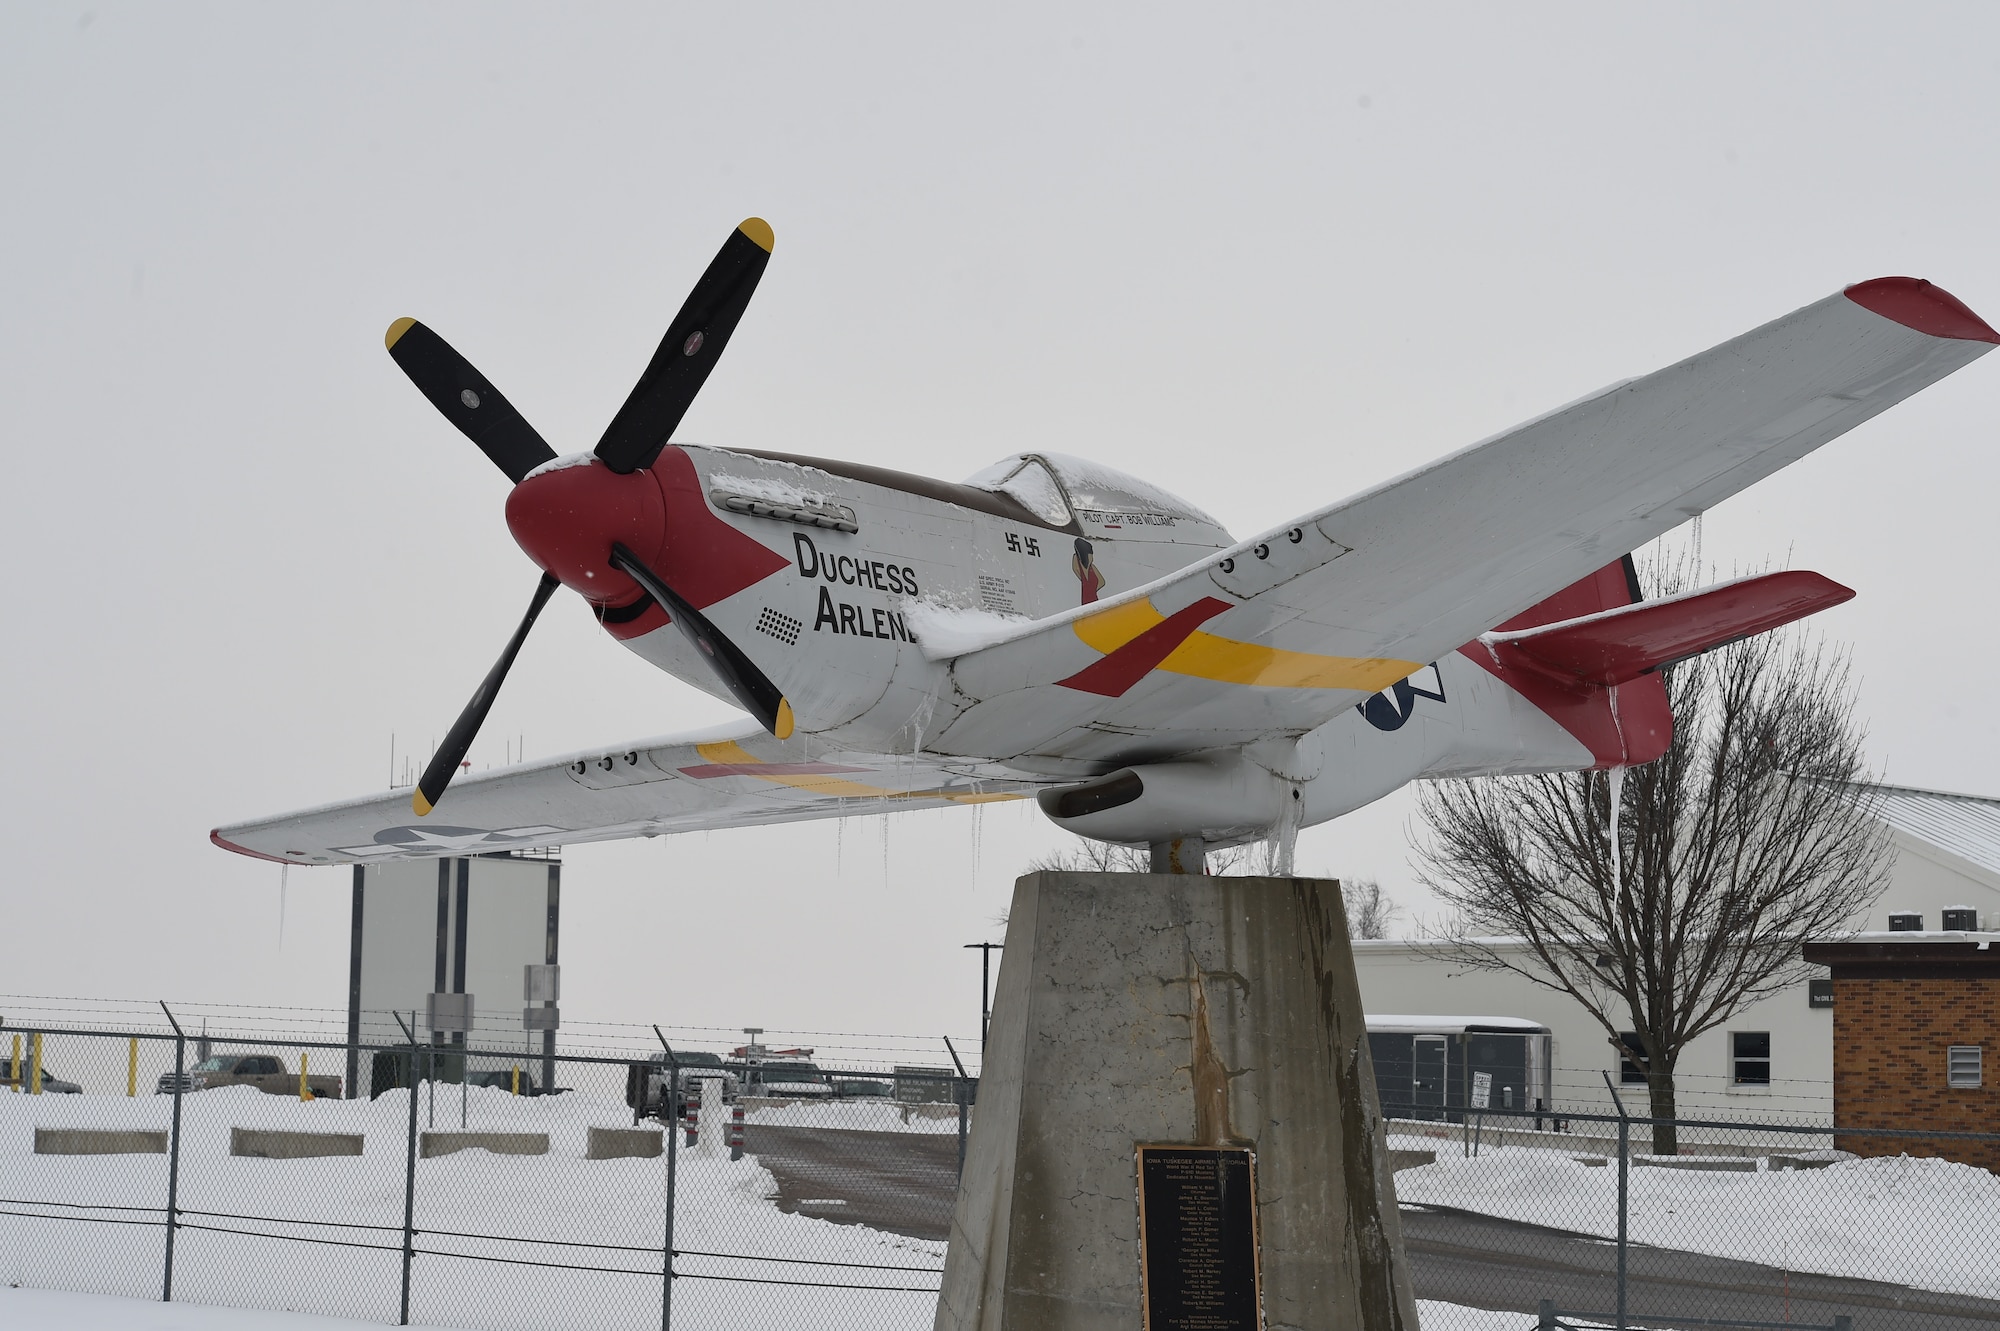 The P-51 Mustang nicknamed "Dutchess Arlene" currently stands outside the front gate of the 132d Wing in Des Moines, Iowa. The aircraft was dedicated to Iowa Tuskegee Airmen in 2002. (U.S. Air National Guard photo by Tech. Sgt. Michael J. Kelly)